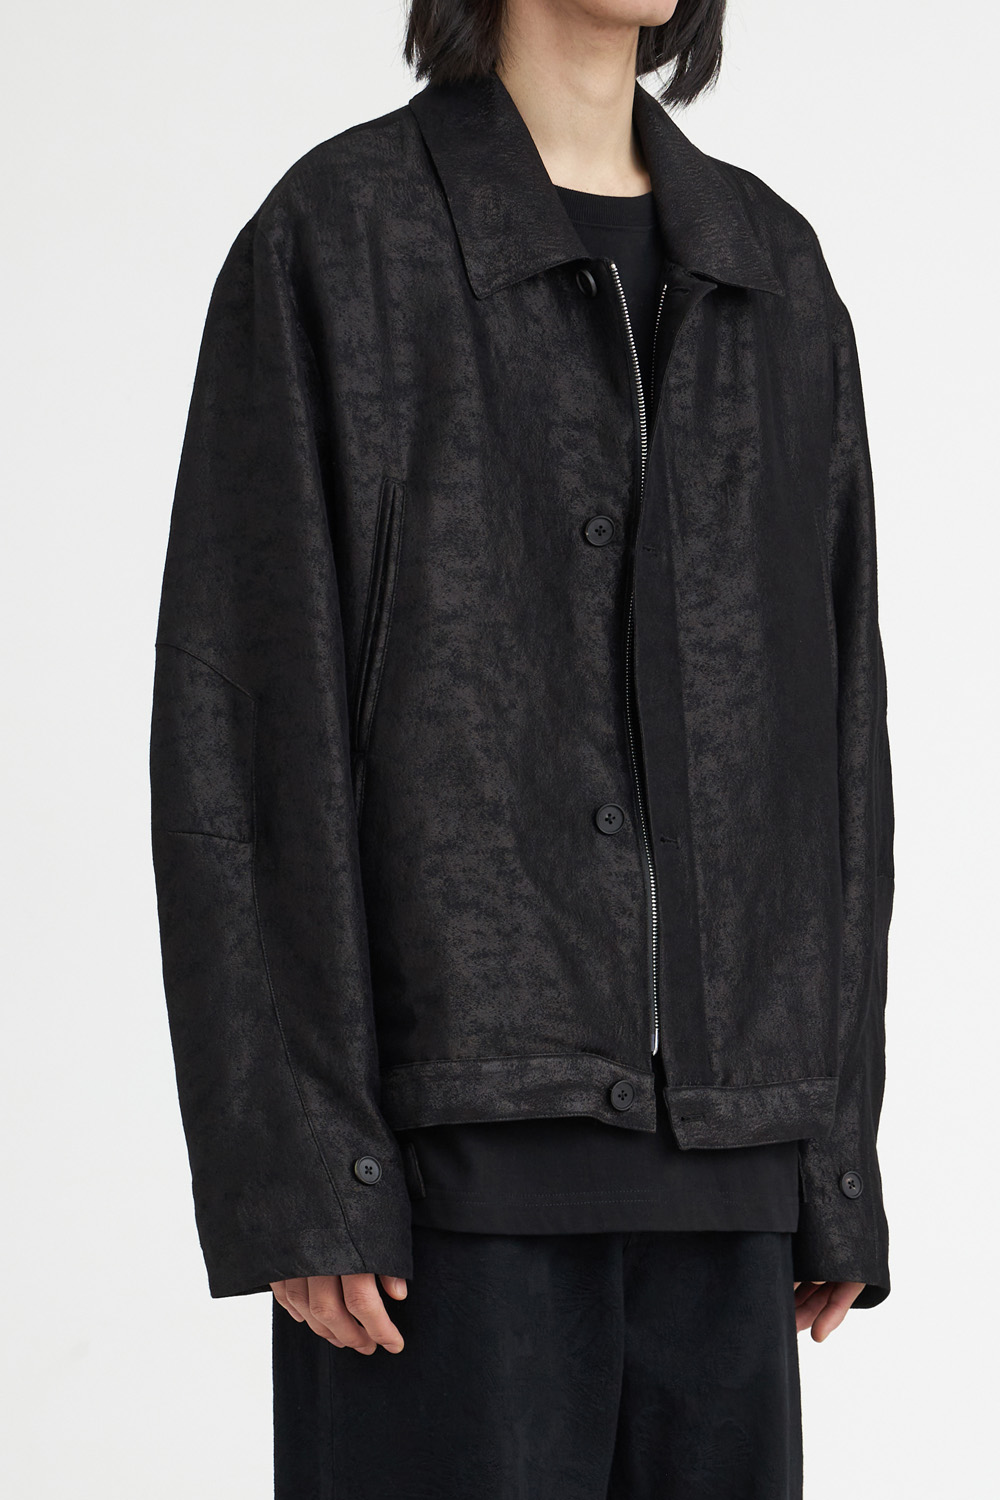 [Obscura Exclusive] Drizzler Jacket Black